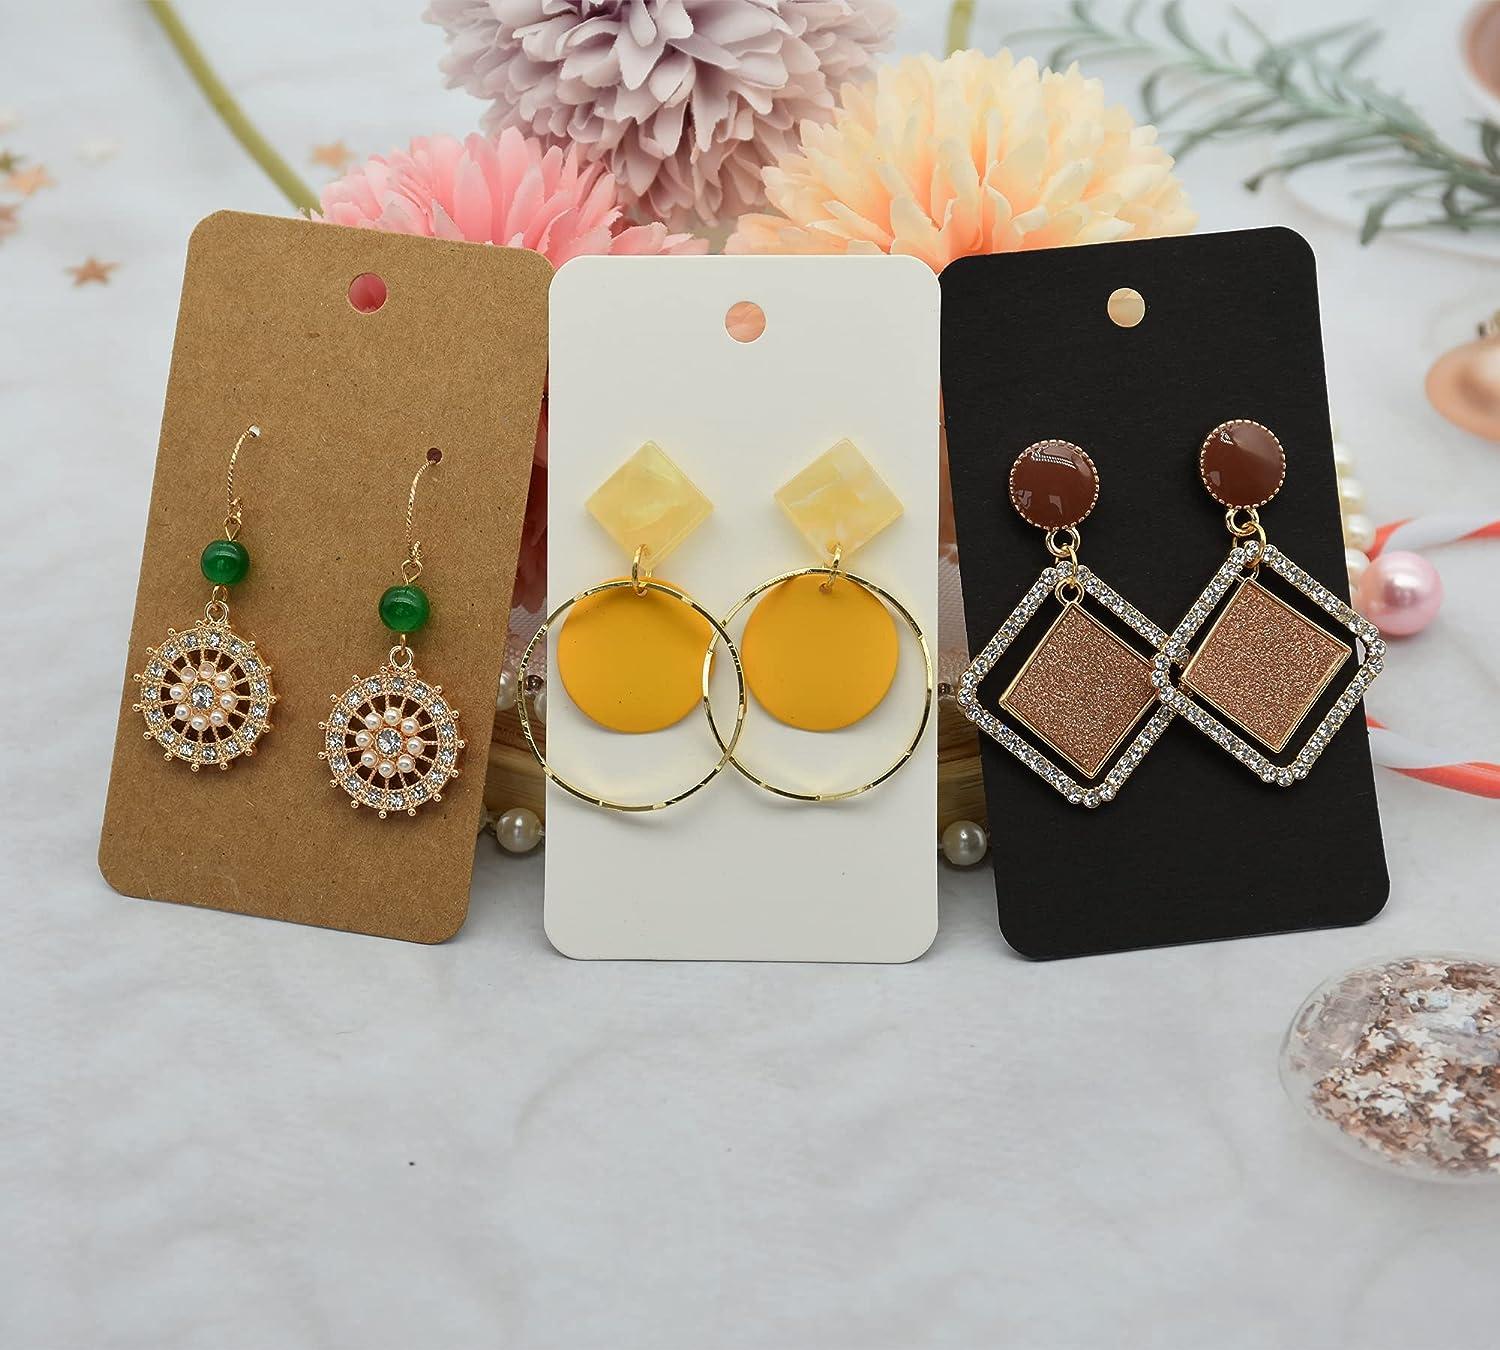 Boxes Wholesale Custom Jewelry Cards Jewelry Display Card Earring Card Gift  Package From Igpvb, $133.92 | DHgate.Com